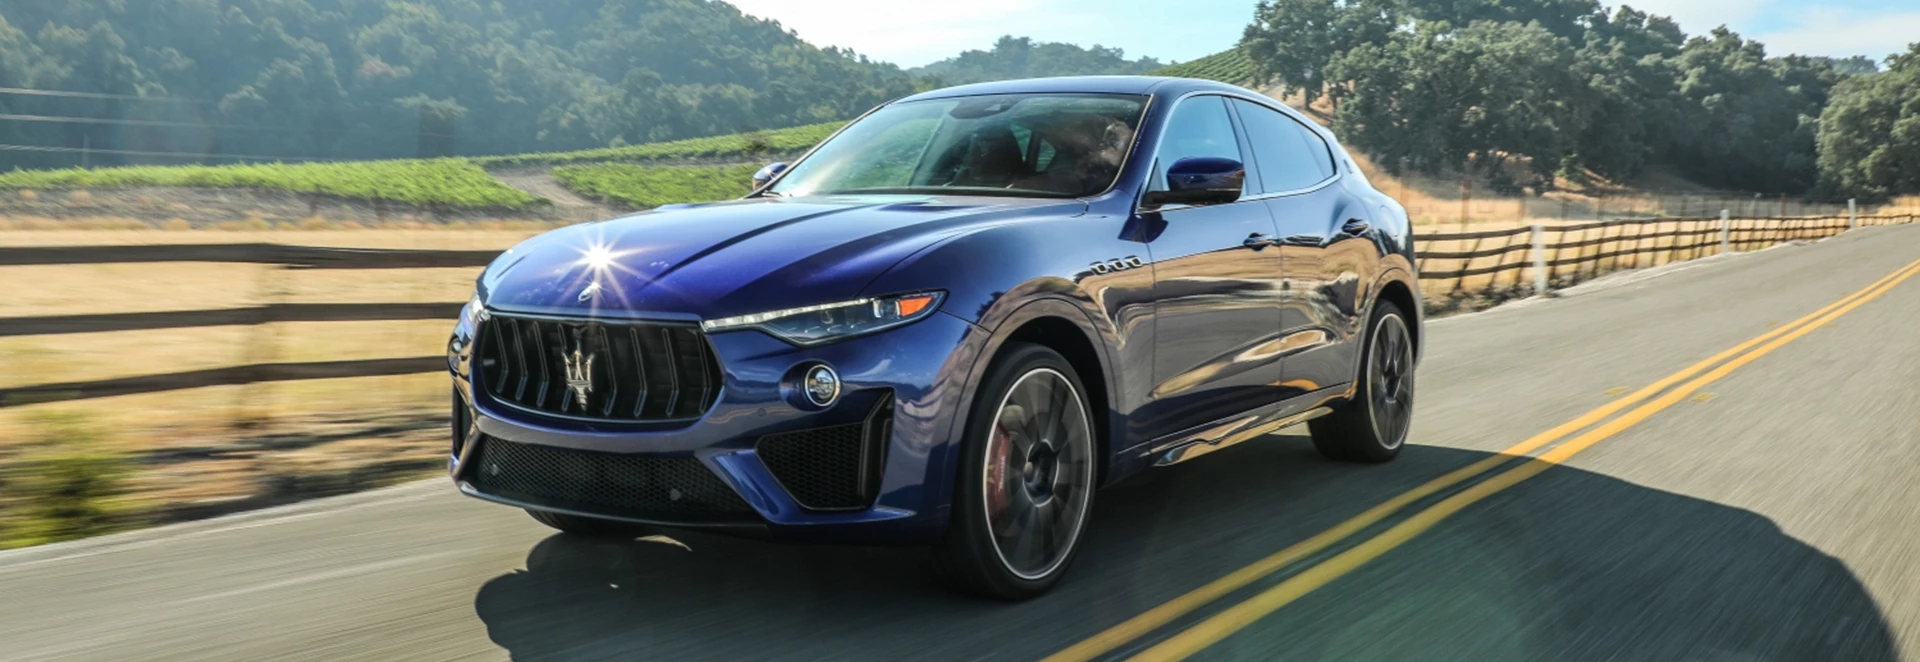 Maserati Levante Trofeo: Why it could be the next big performance SUV